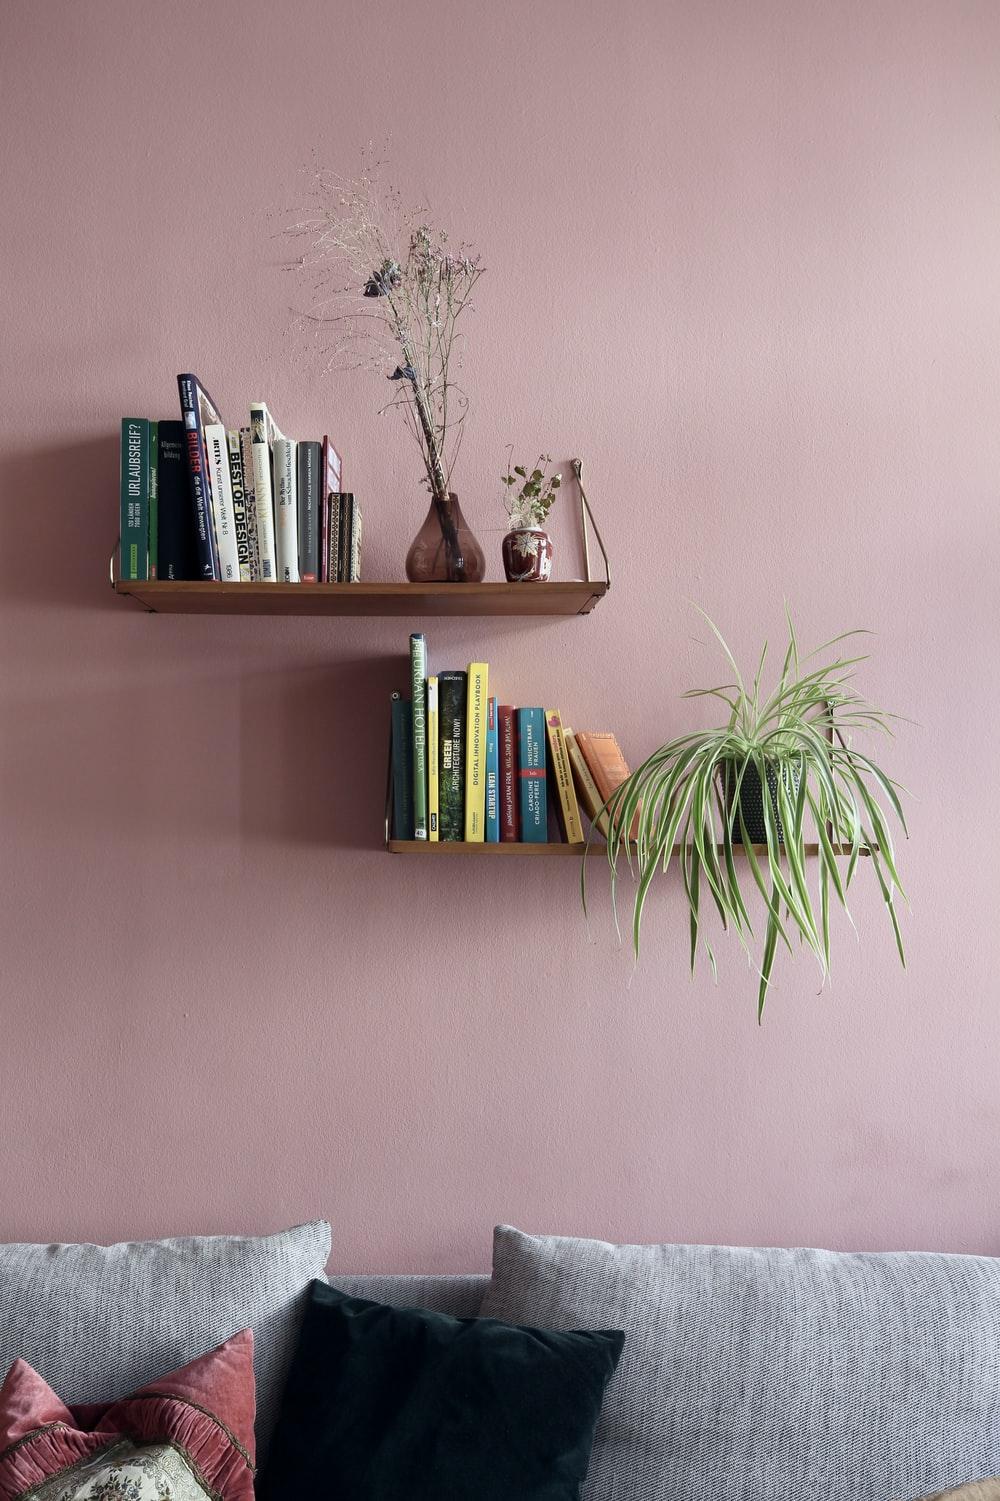 Floating shelves can also add visual interest to your small space. Photo from Unsplash.